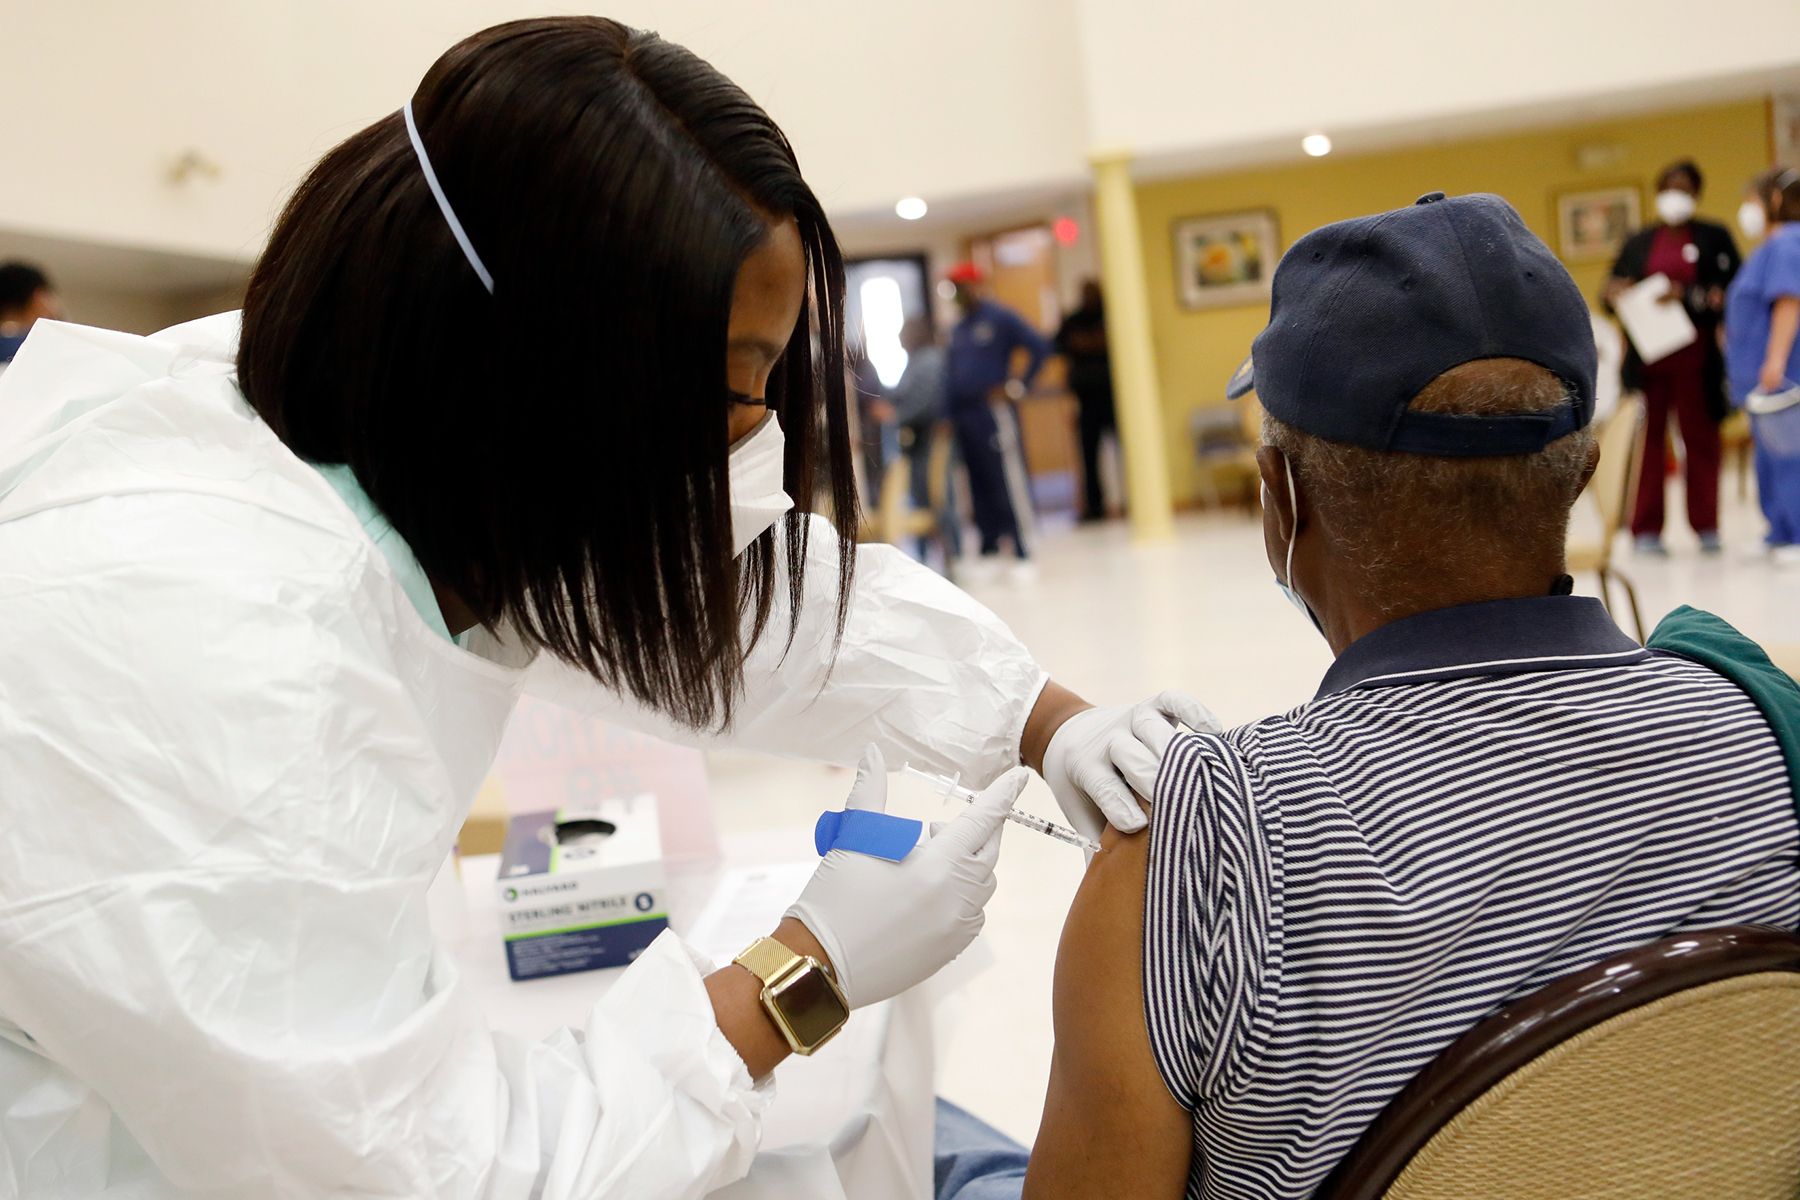 TAMPA, FL - JANUARY 10: Healthcare workers administer the COVID-19 vaccine to residents living in the Jackson Heights neighborhood at St. Johns Missionary Baptist Church on January 10, 2021 in Tampa, Florida. The Florida Department of Health is targeting the underserved populations that are most vulnerable to getting the coronavirus, specifically the African and Latin American communities. (Photo by Octavio Jones/Getty Images)